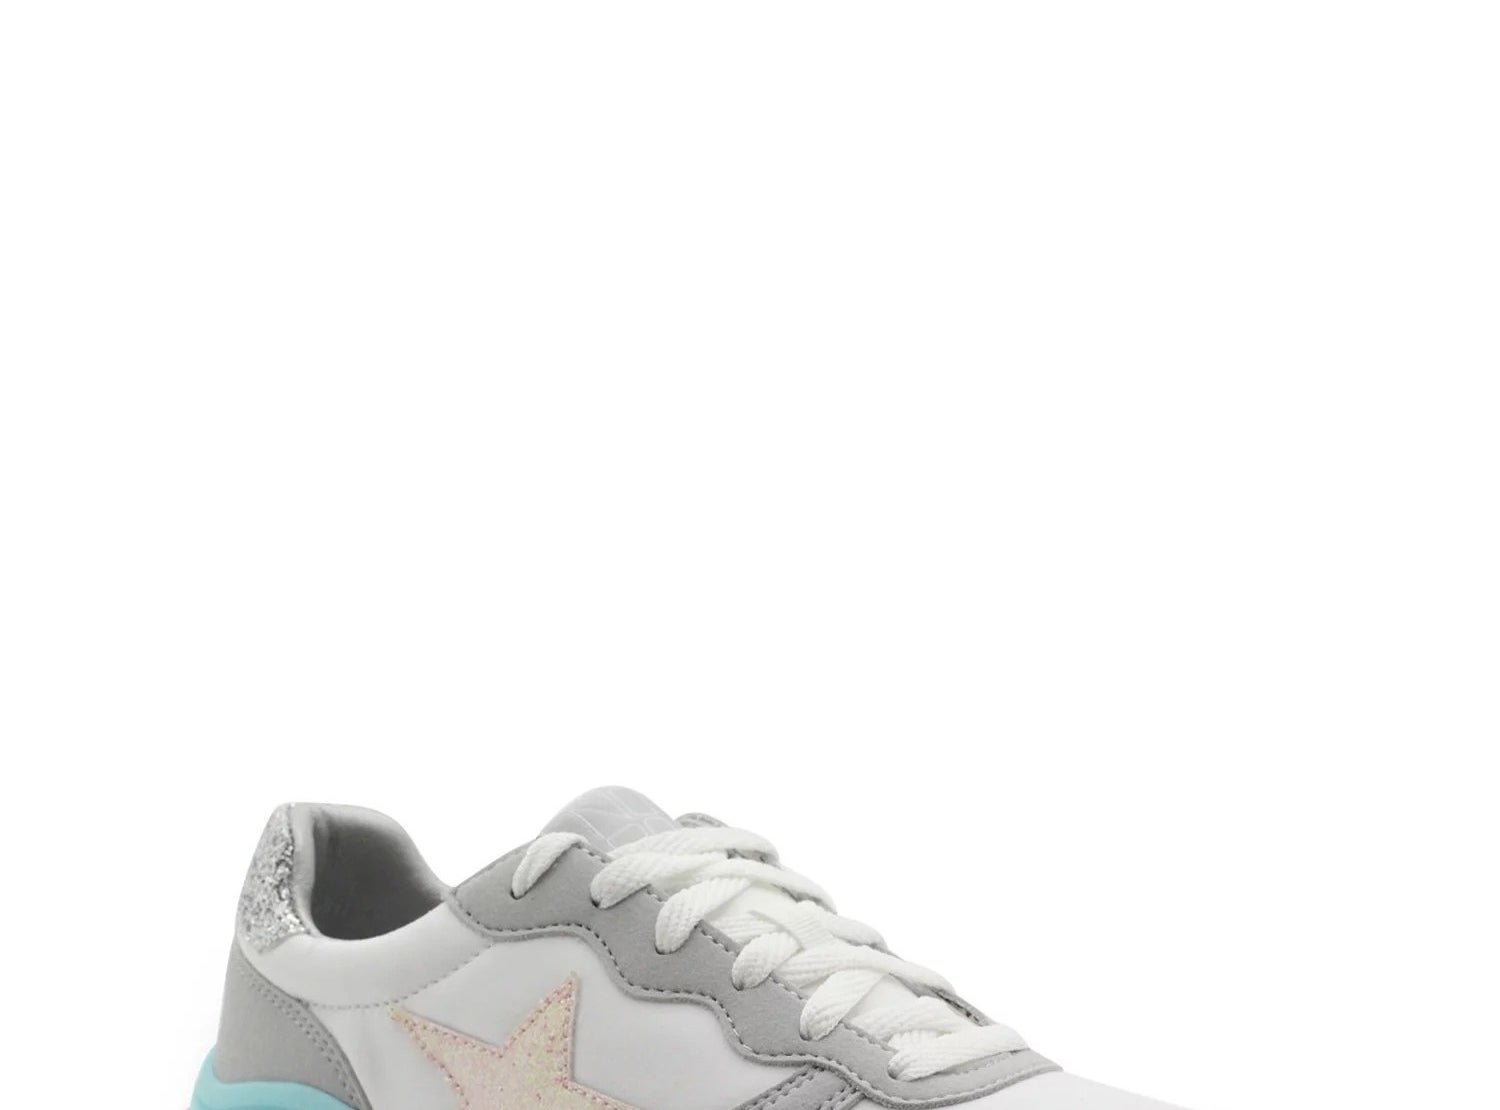 A pair of grey, pink, white and blue sneaker